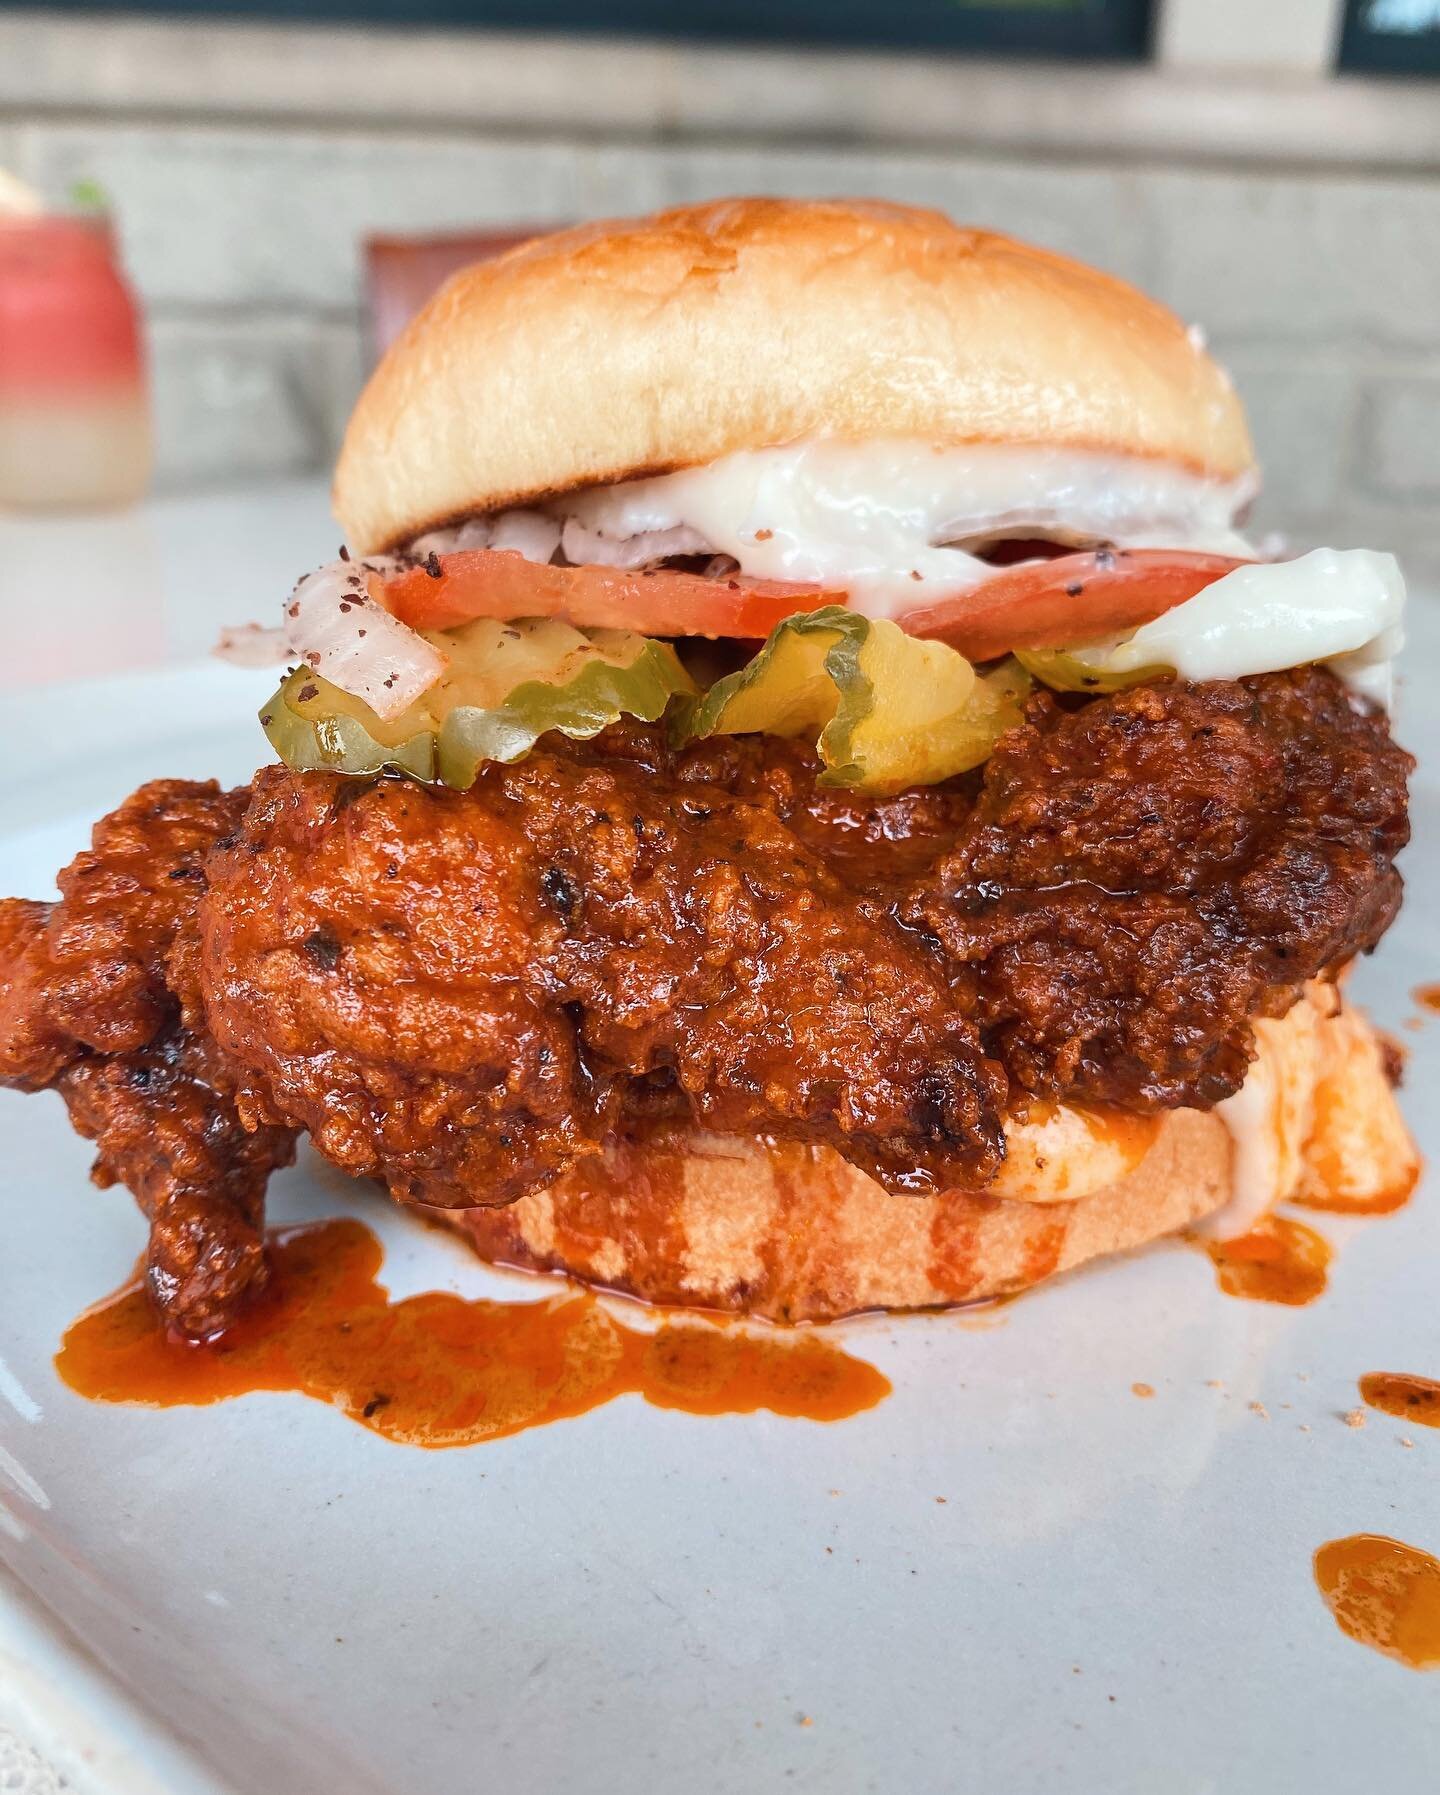 This Friday. One weekend only. 

The best chicken sandwich in Chicago is back. 

Comment the name of this sandwich. #iykyk 

🔥🔥🔥🔥🔥🔥🔥🔥🔥

#itsback #spicychickensandwich #eatcedars #chicagosbest #chicagofoodmag #chicagoeats #eeeeats #dhpchicago